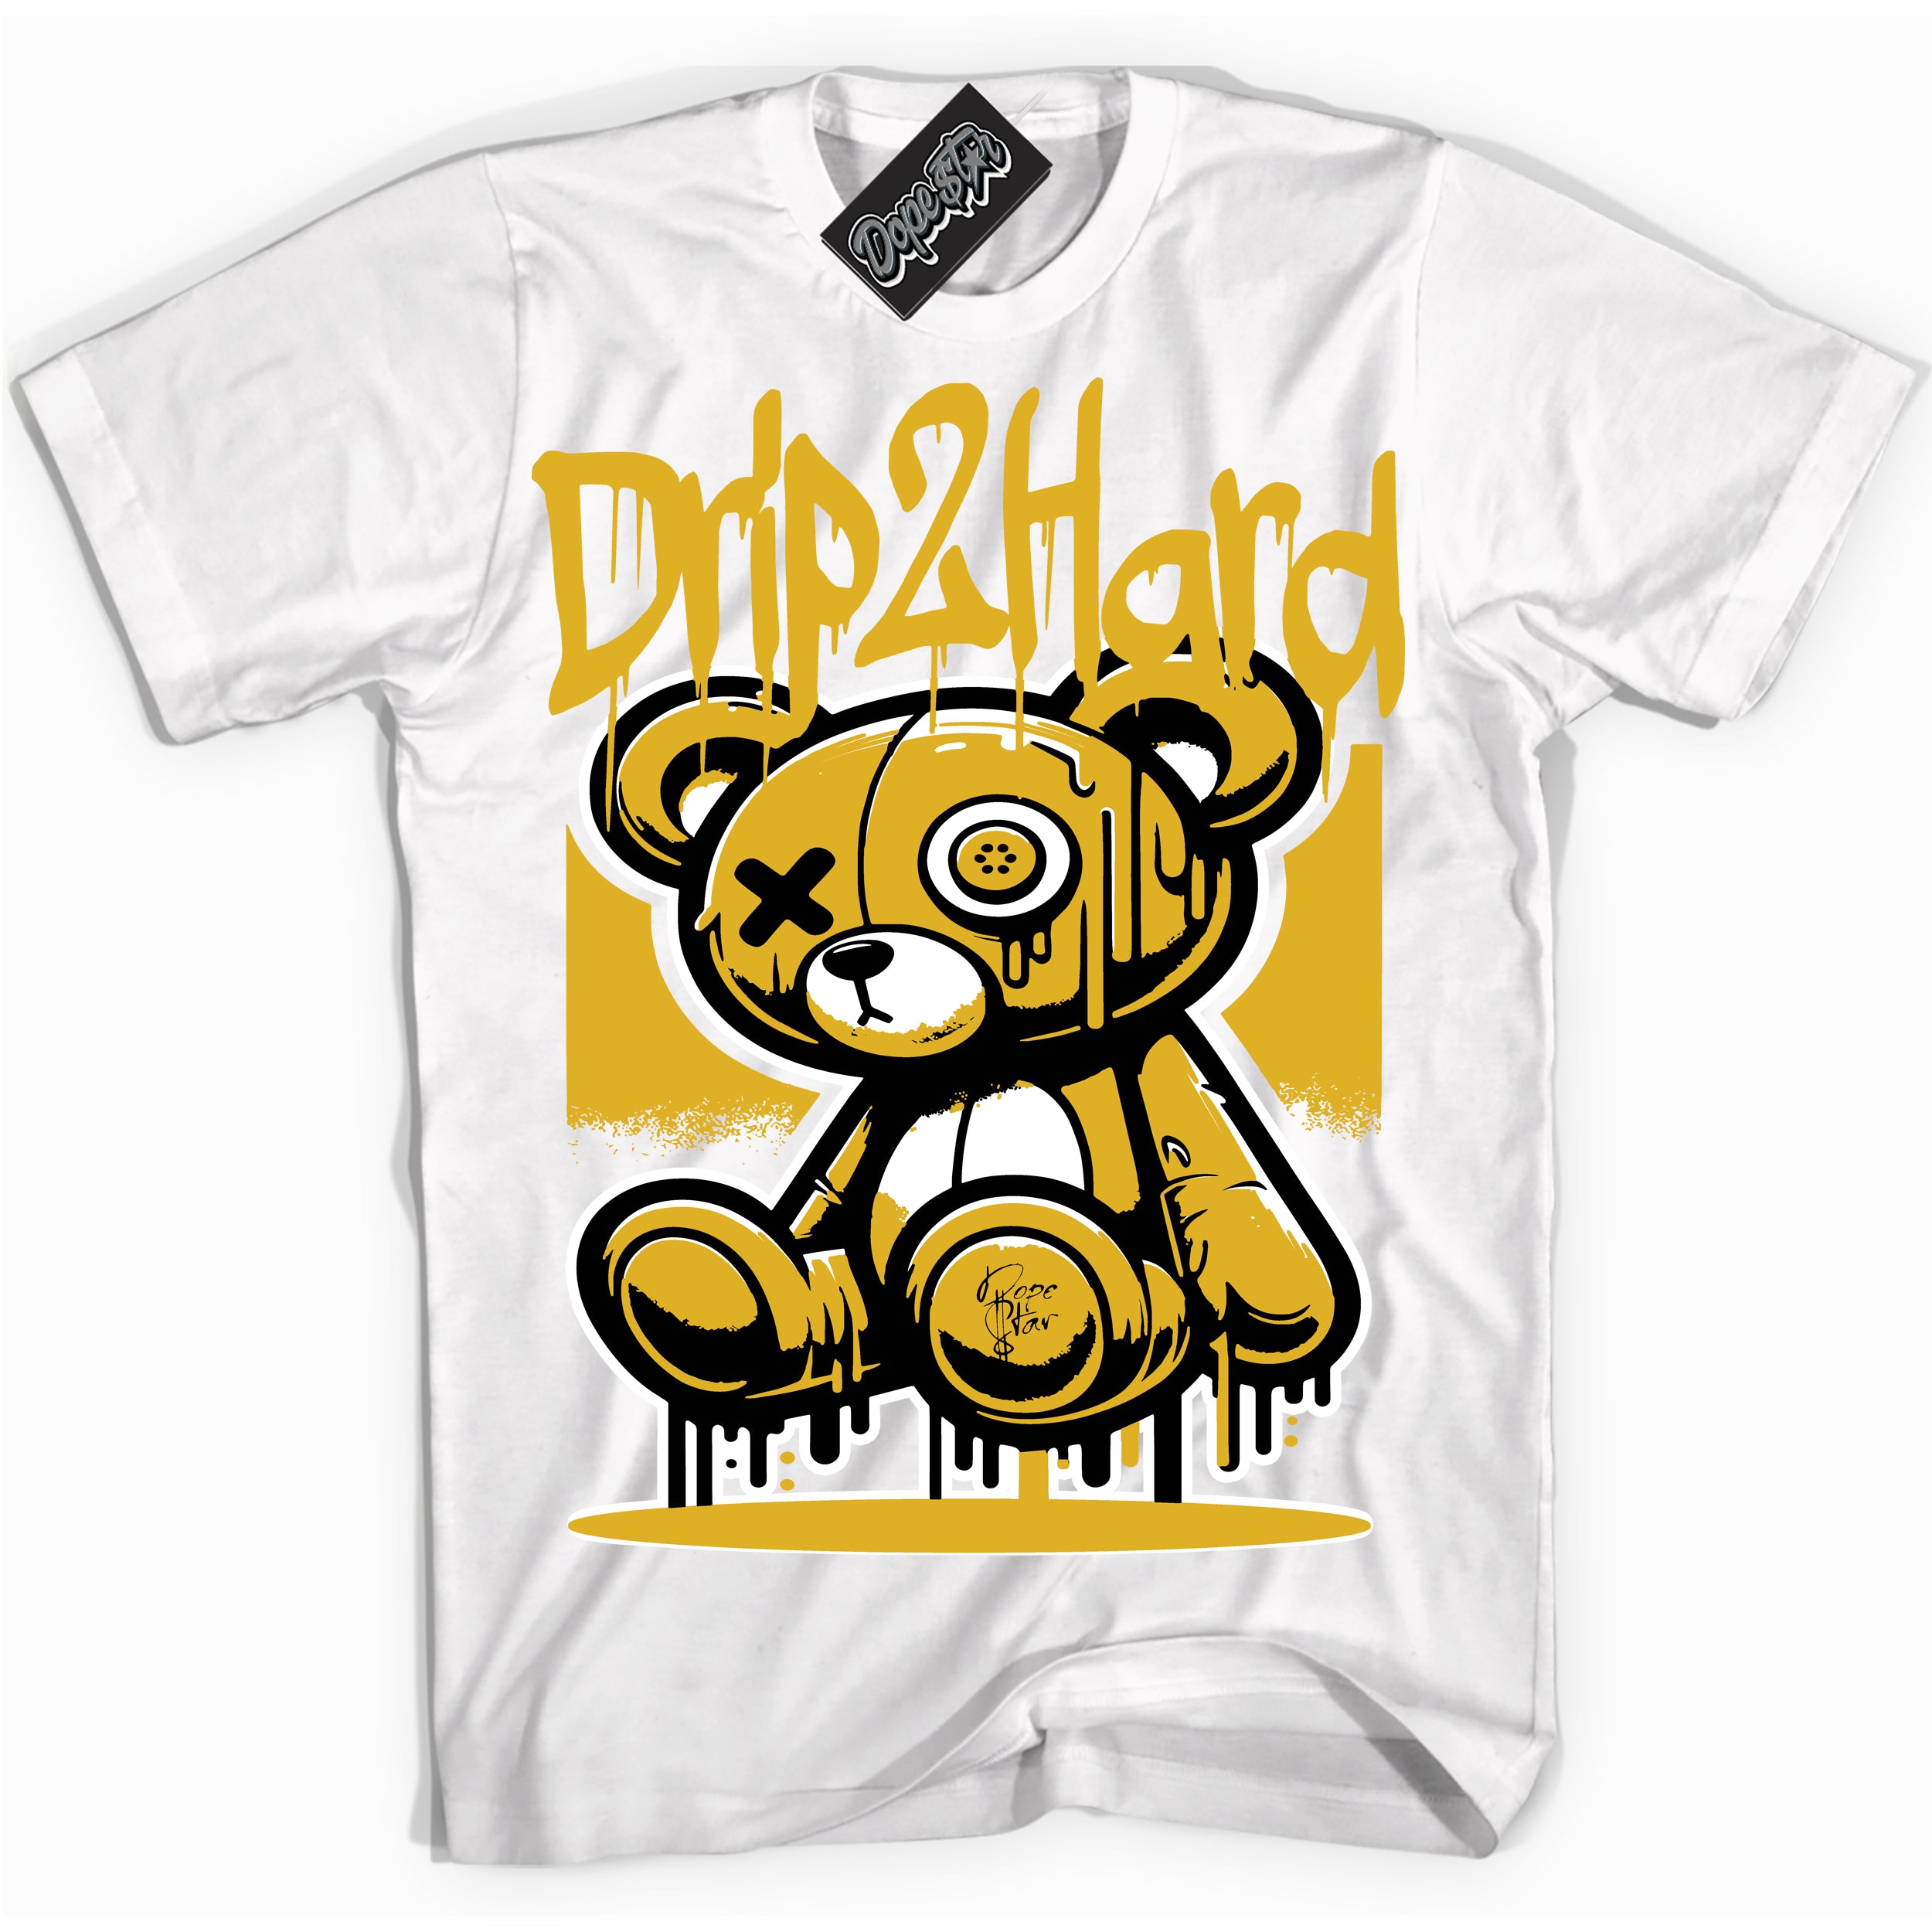 Cool White Shirt With Drip 2 Hard  design That Perfectly Matches YELLOW OCHRE 6s Sneakers.